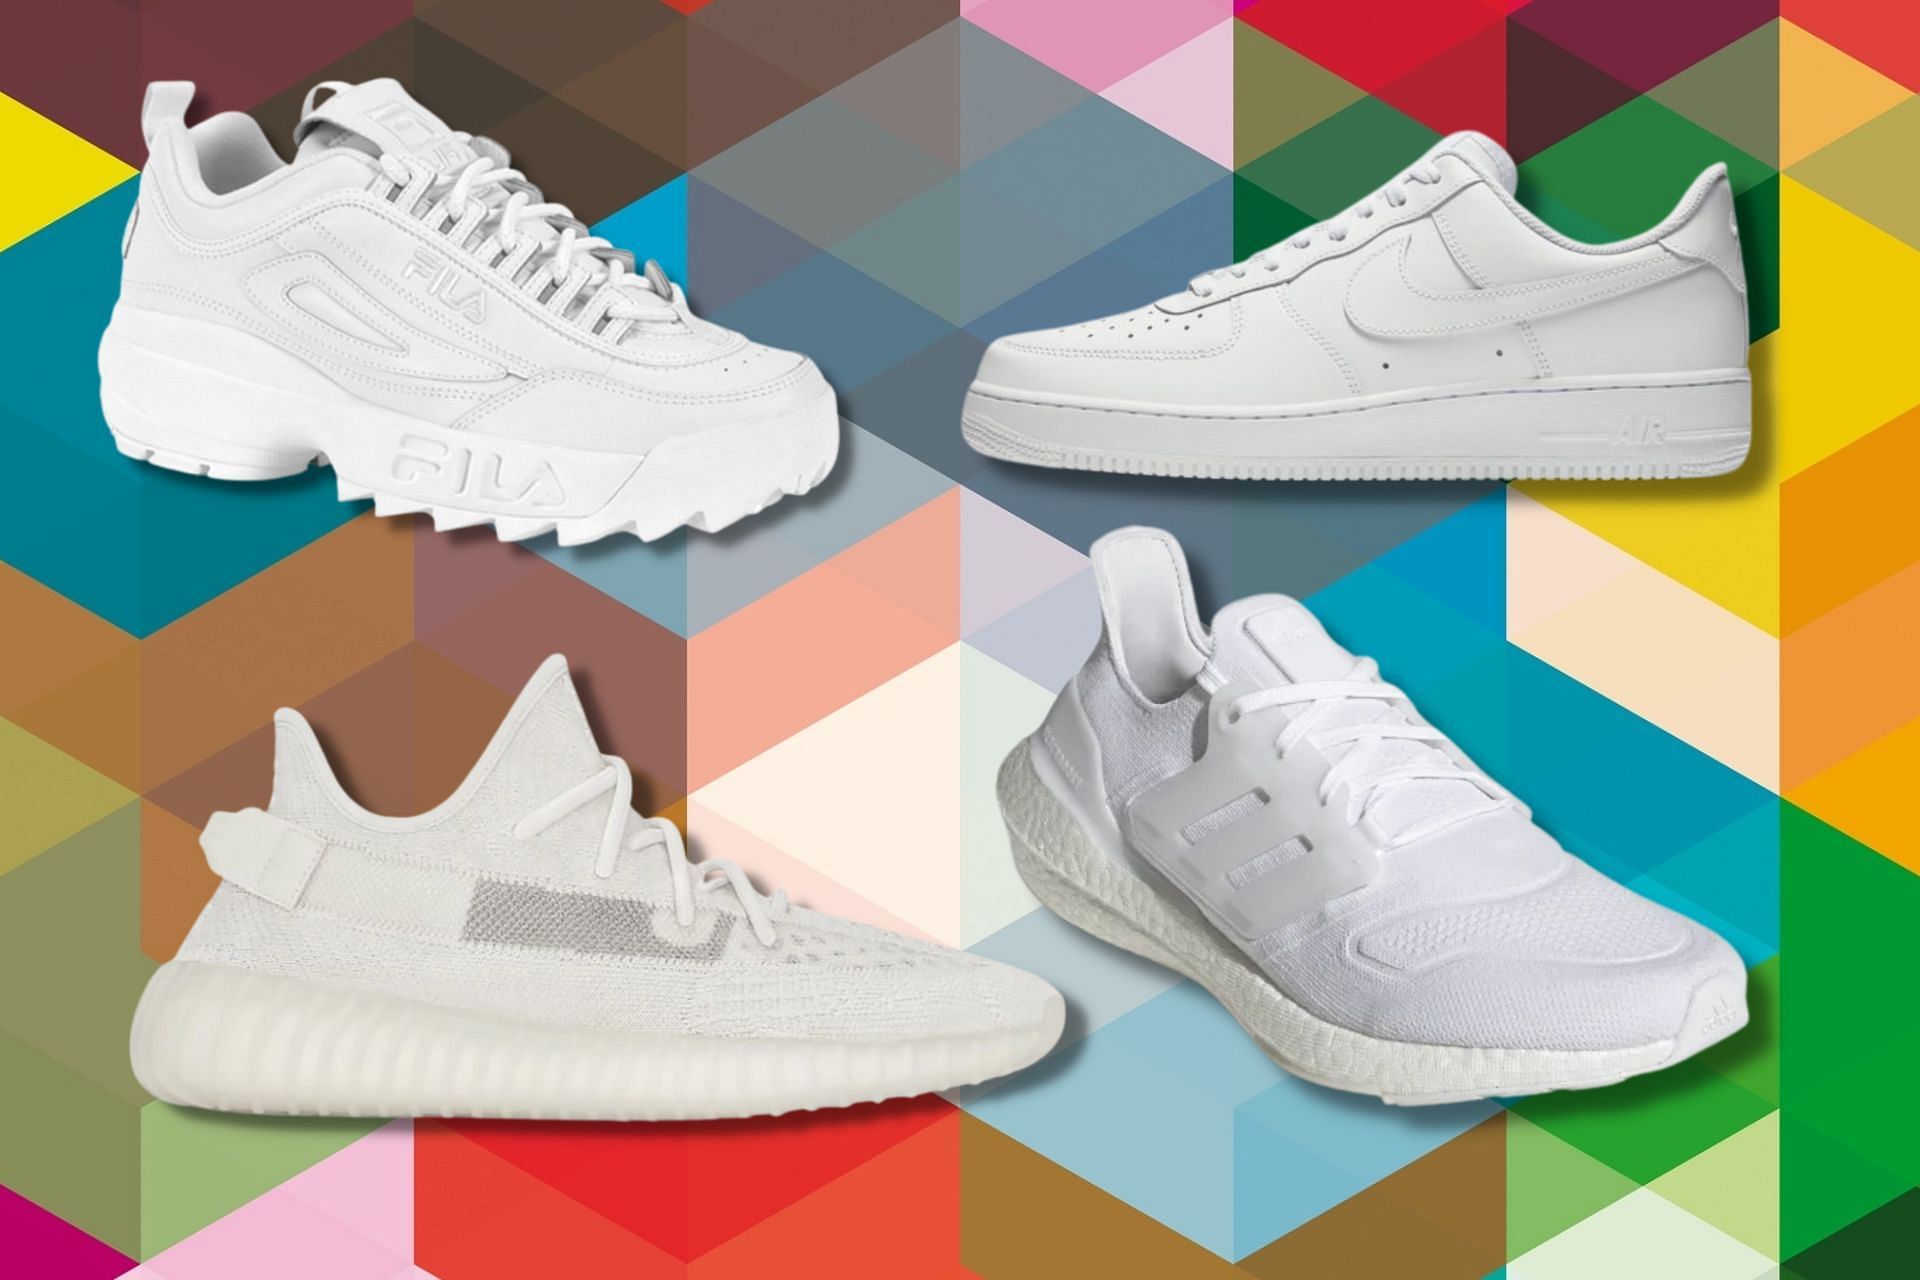 Four best all-white sneakers to buy from top brands (Image via Sportskeeda)